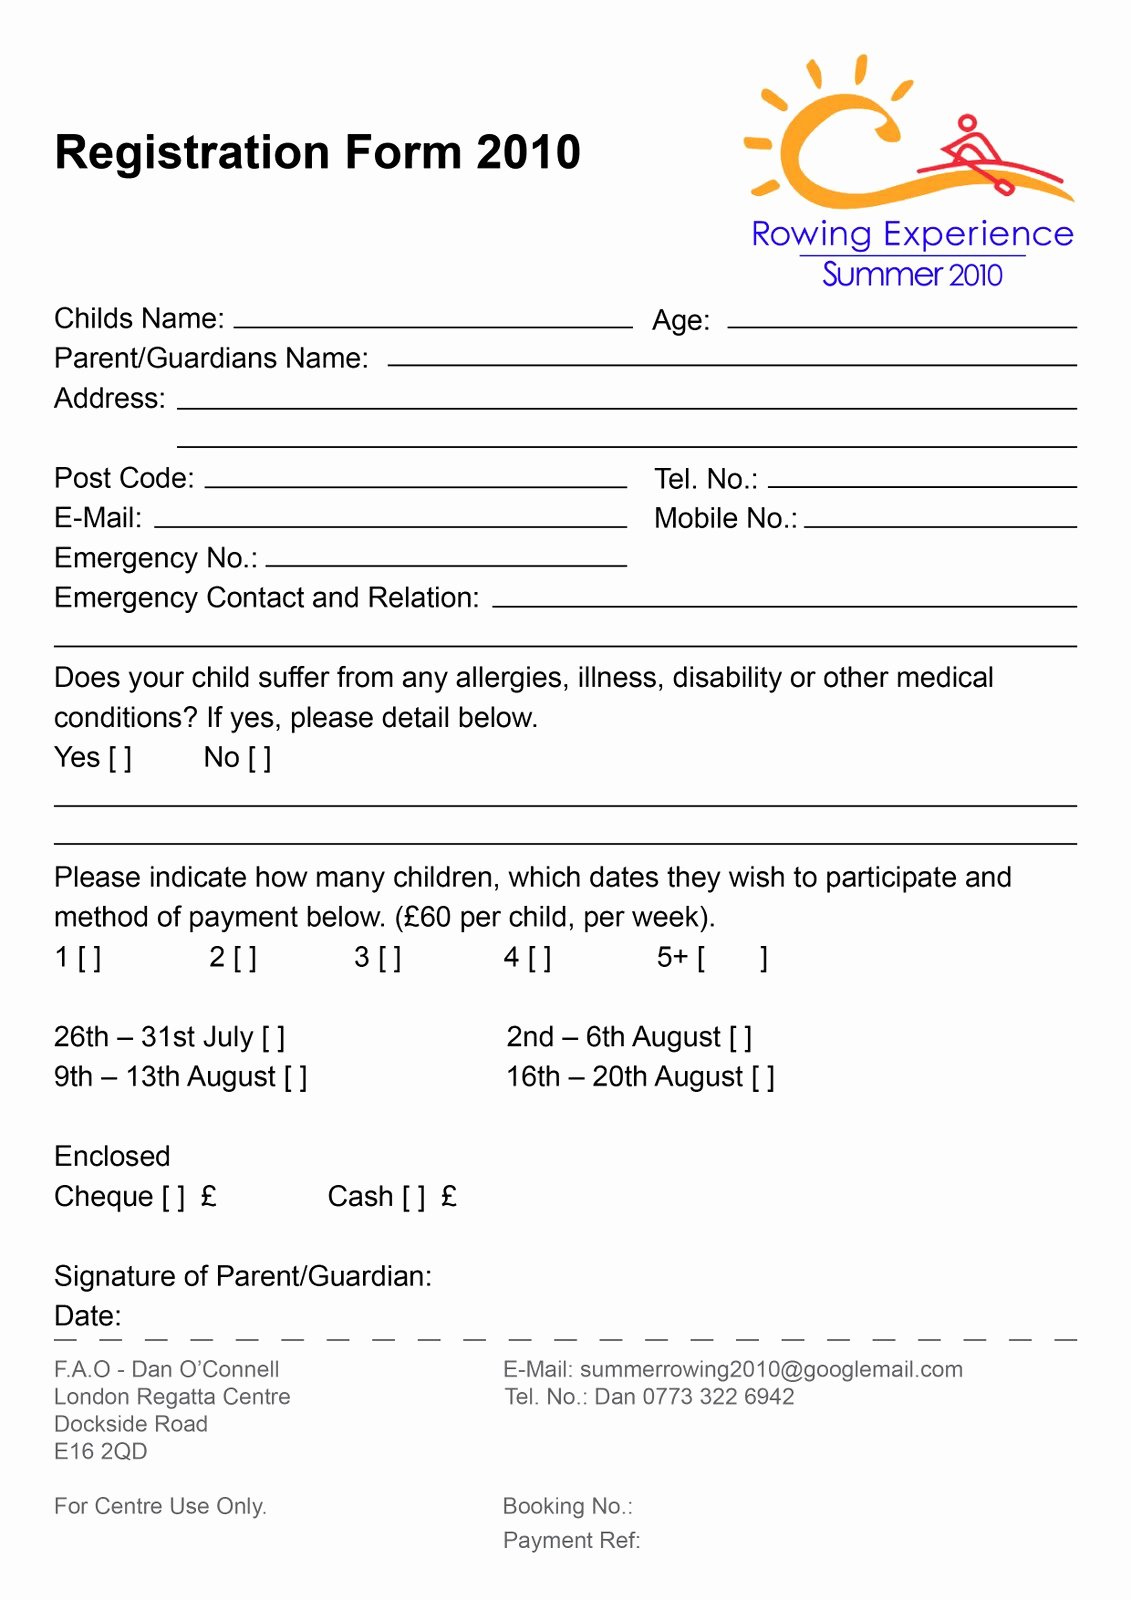 Camp Registration form Template Best Of Rowing Experience